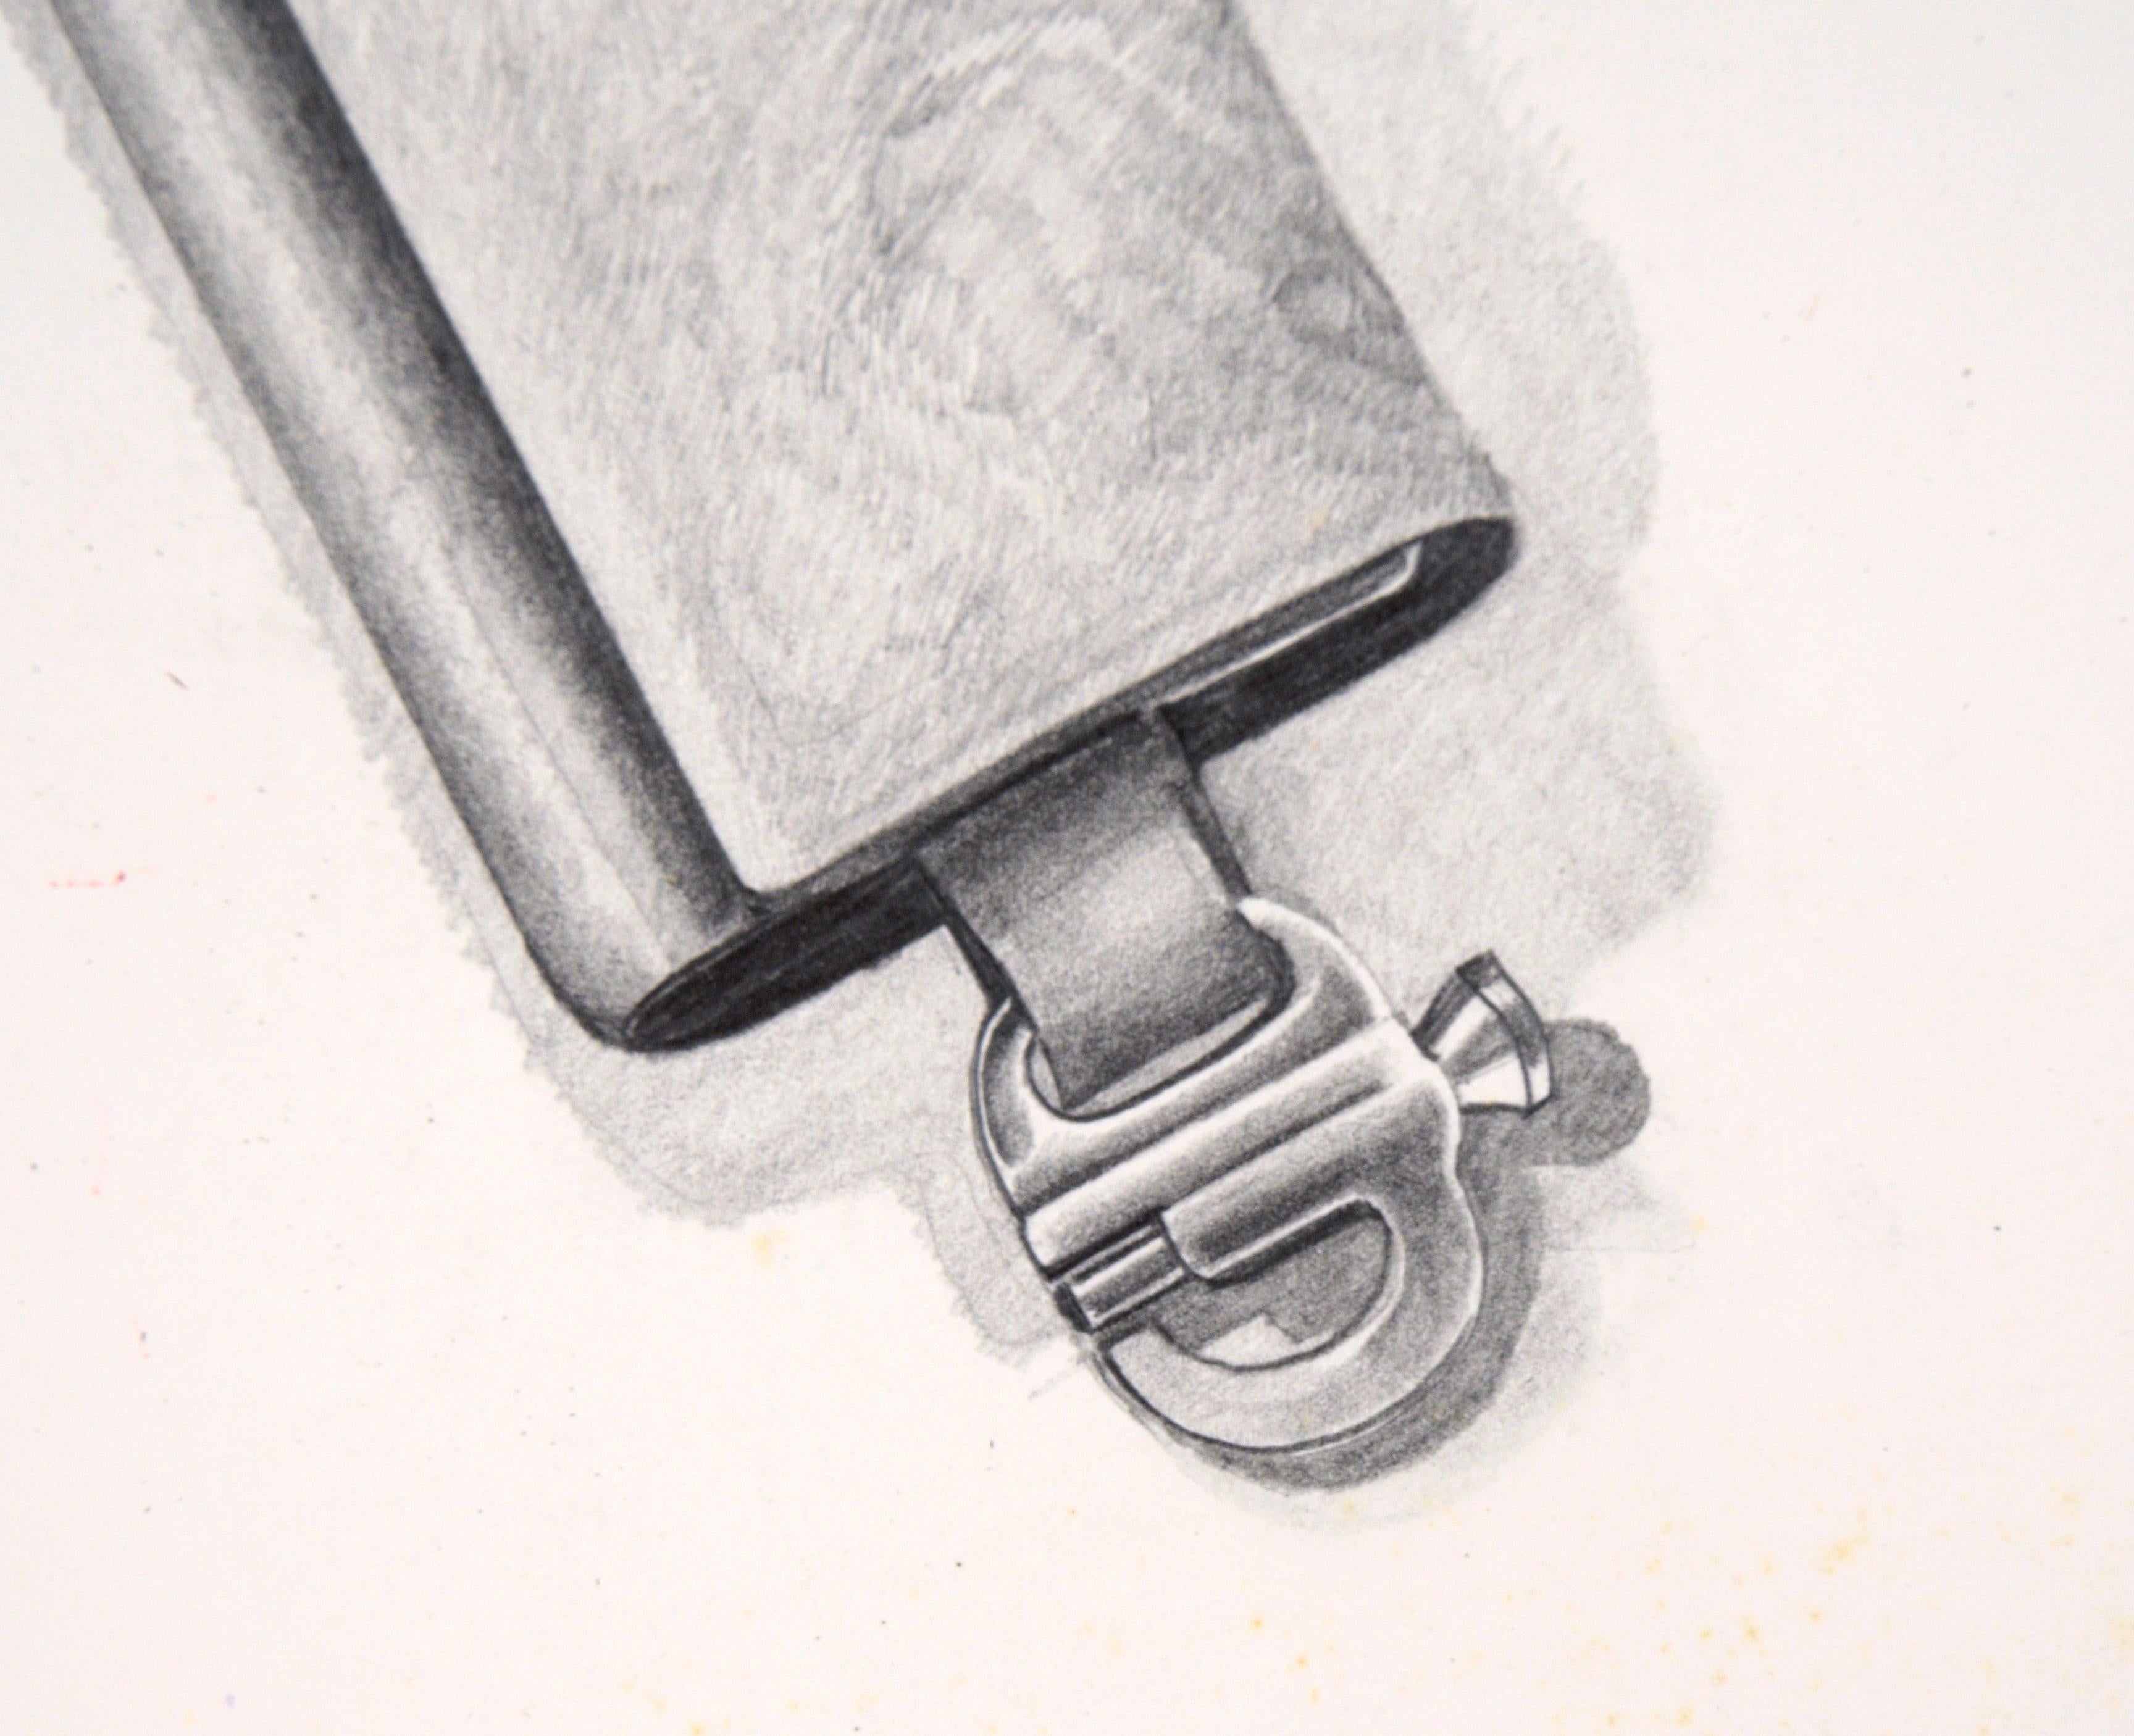 Clutch for Keys - Realistic Illustration by Michael Eggleston For Sale 1